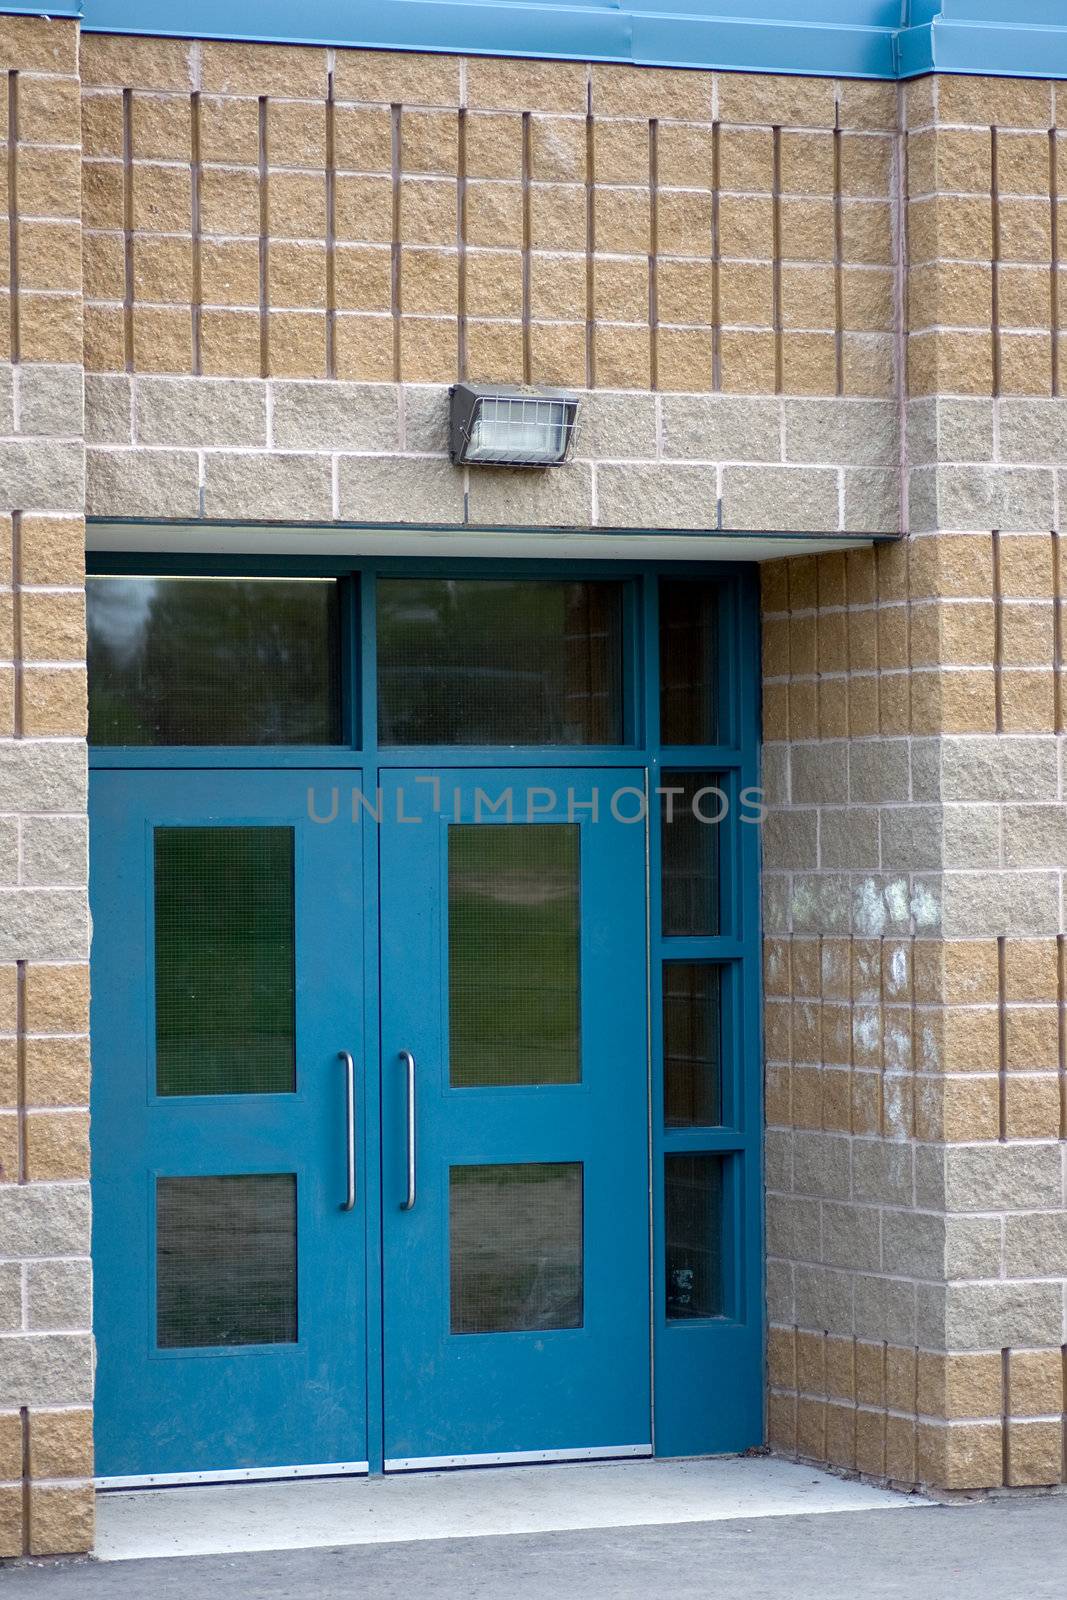 A set of blue school double doors surrounded by gray and brown brick.